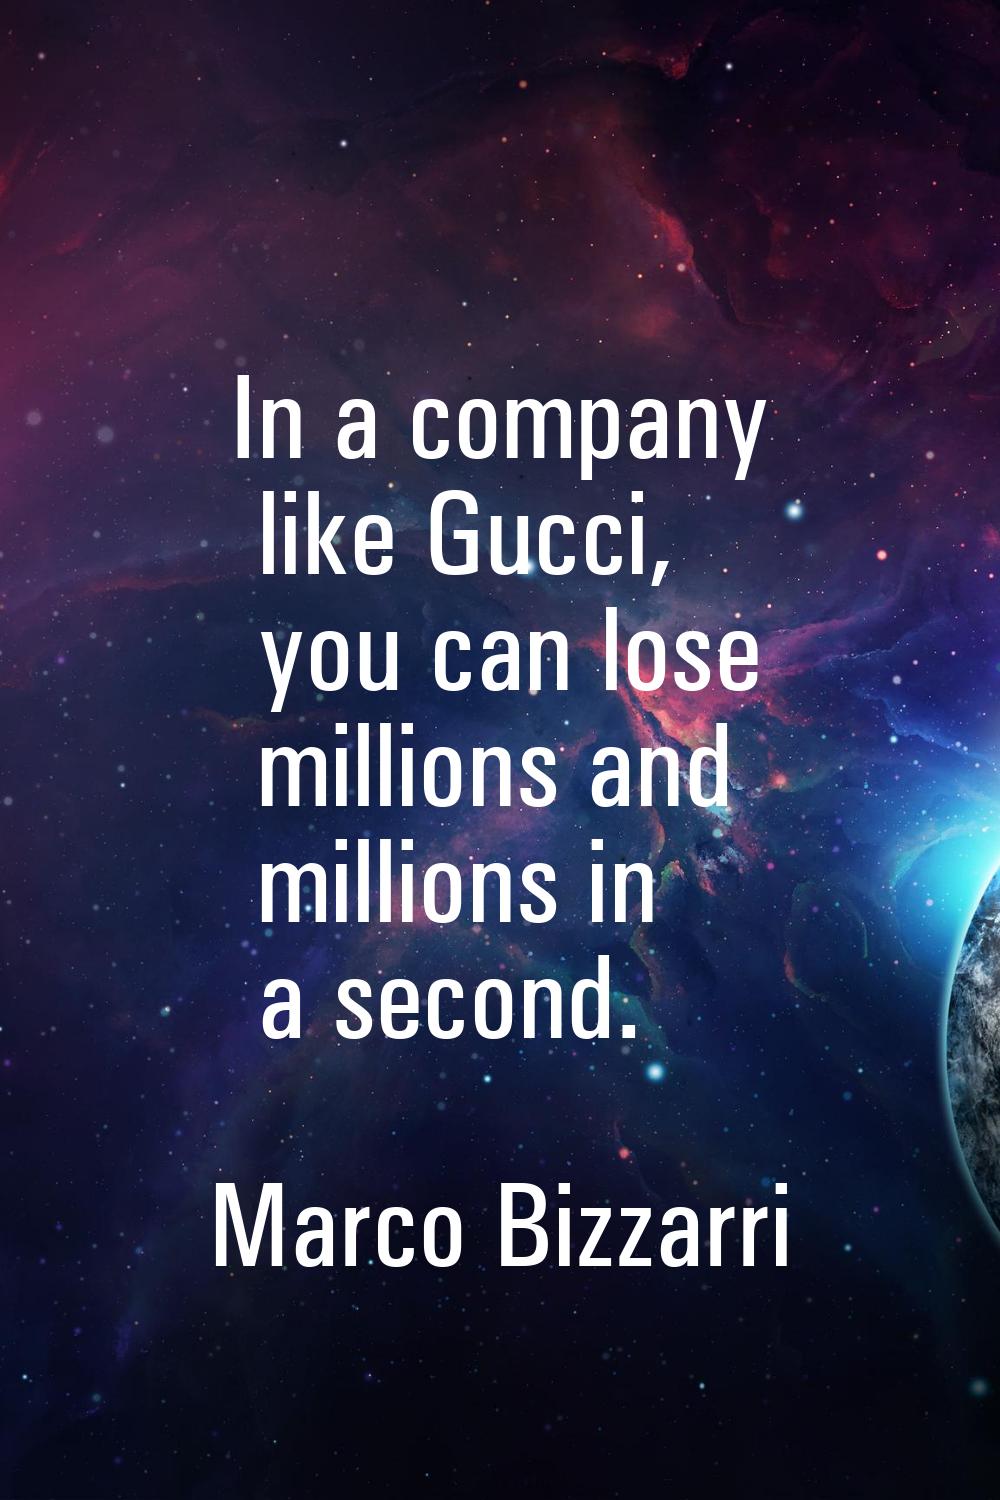 In a company like Gucci, you can lose millions and millions in a second.